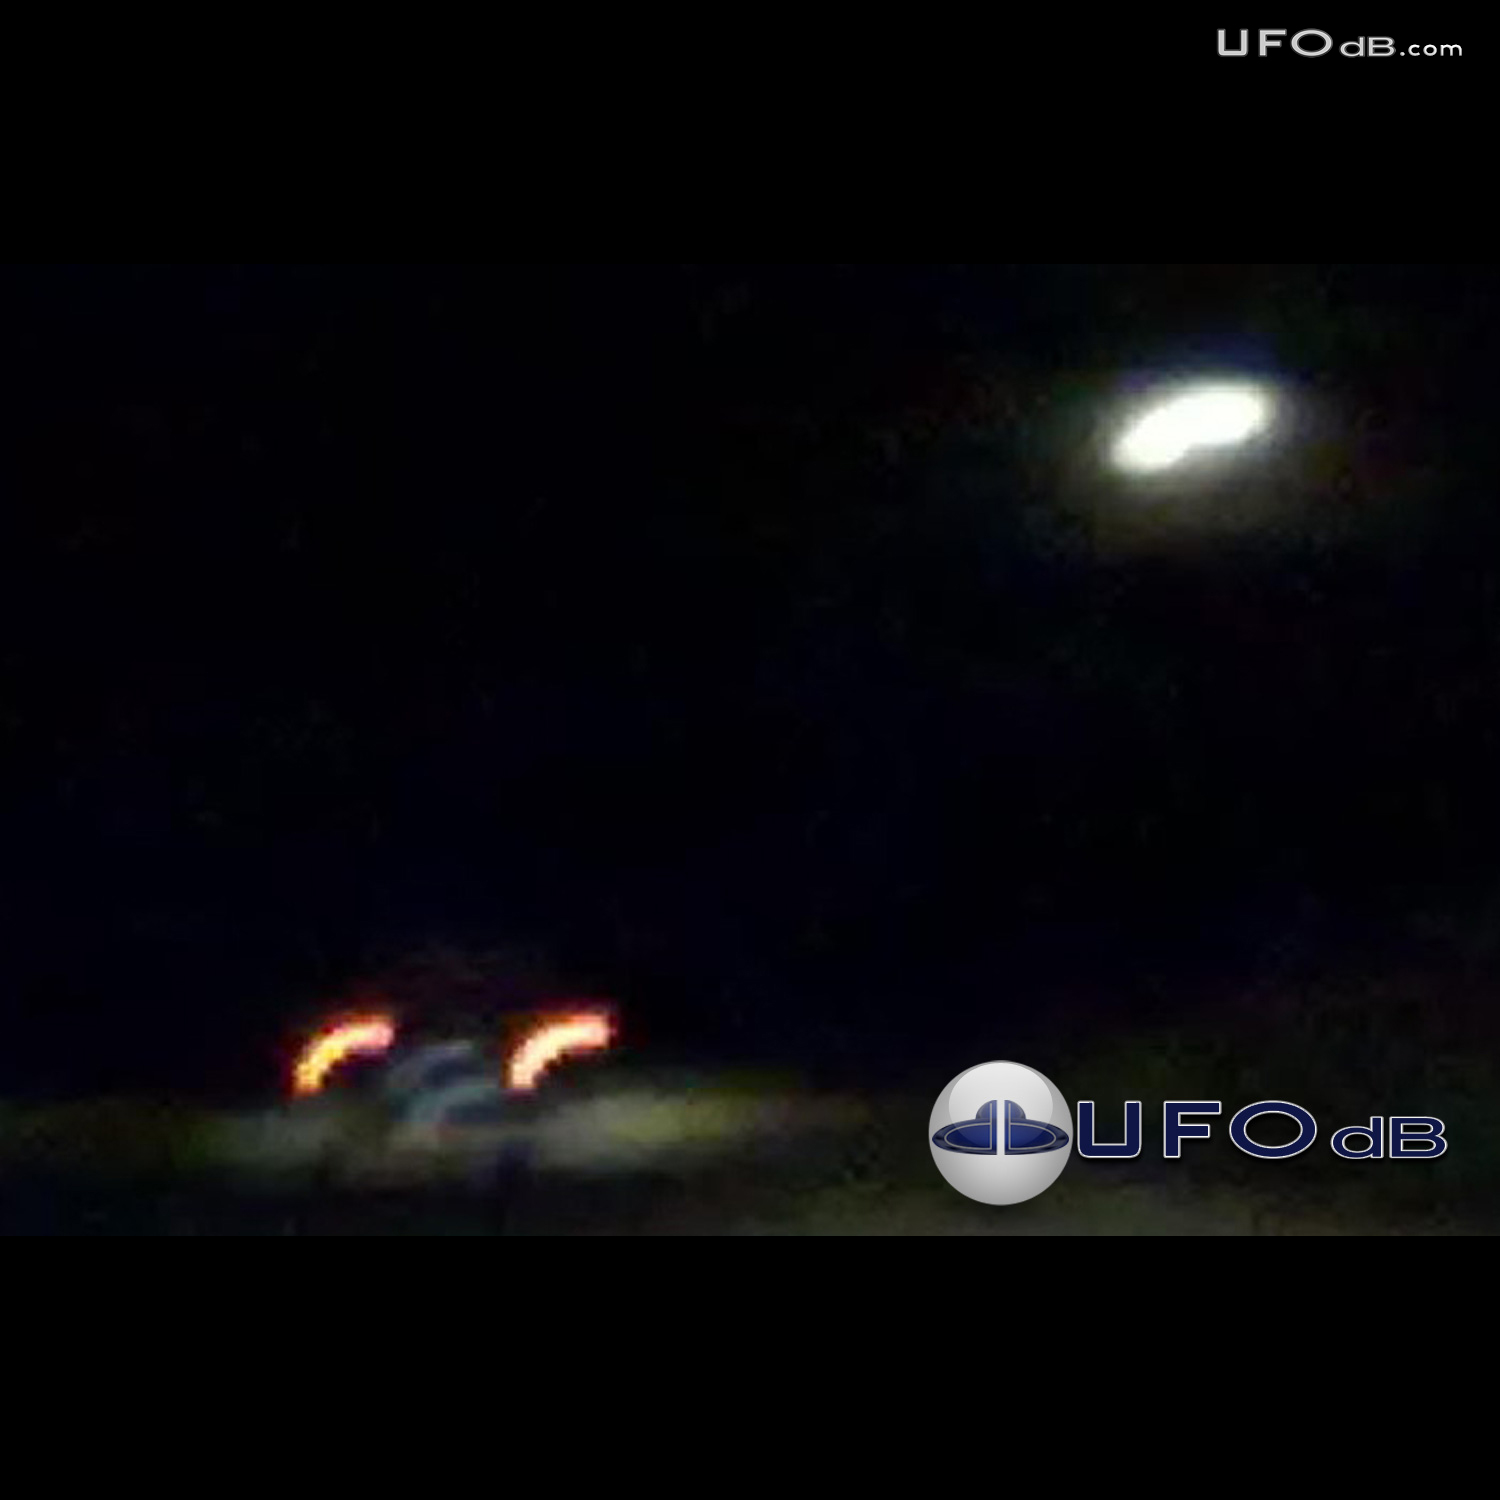 Two cars stops on the highway to look at a UFO - Argentina April 2011 UFO Picture #279-1